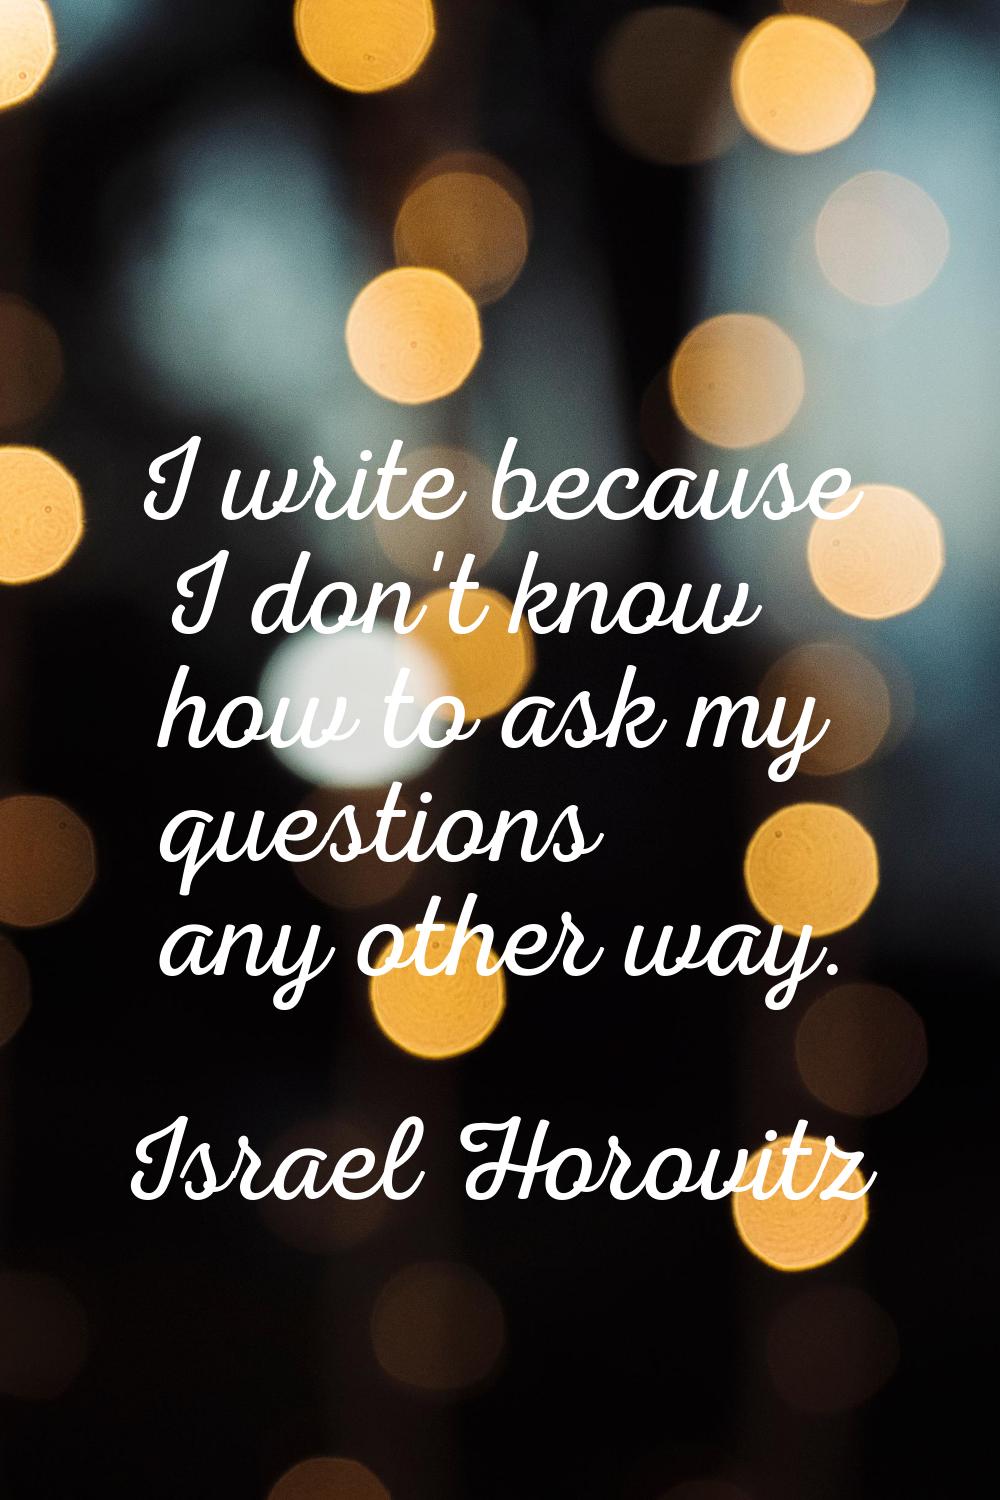 I write because I don't know how to ask my questions any other way.